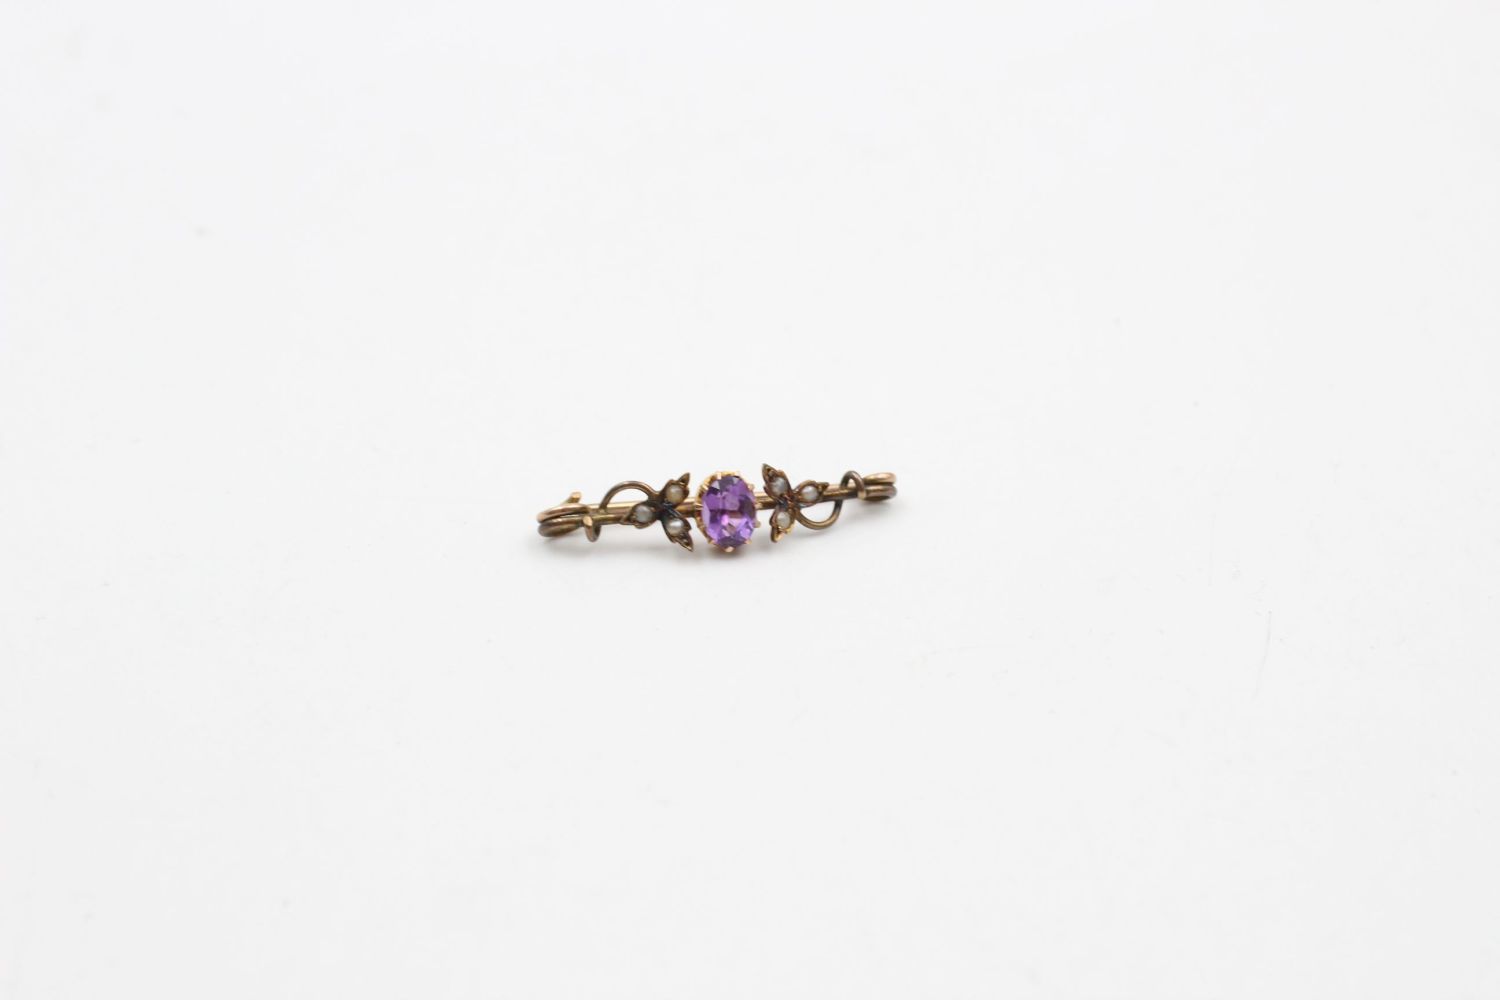 9ct gold amethyst and pearl antique bar brooch 2 grams gross - Image 2 of 4